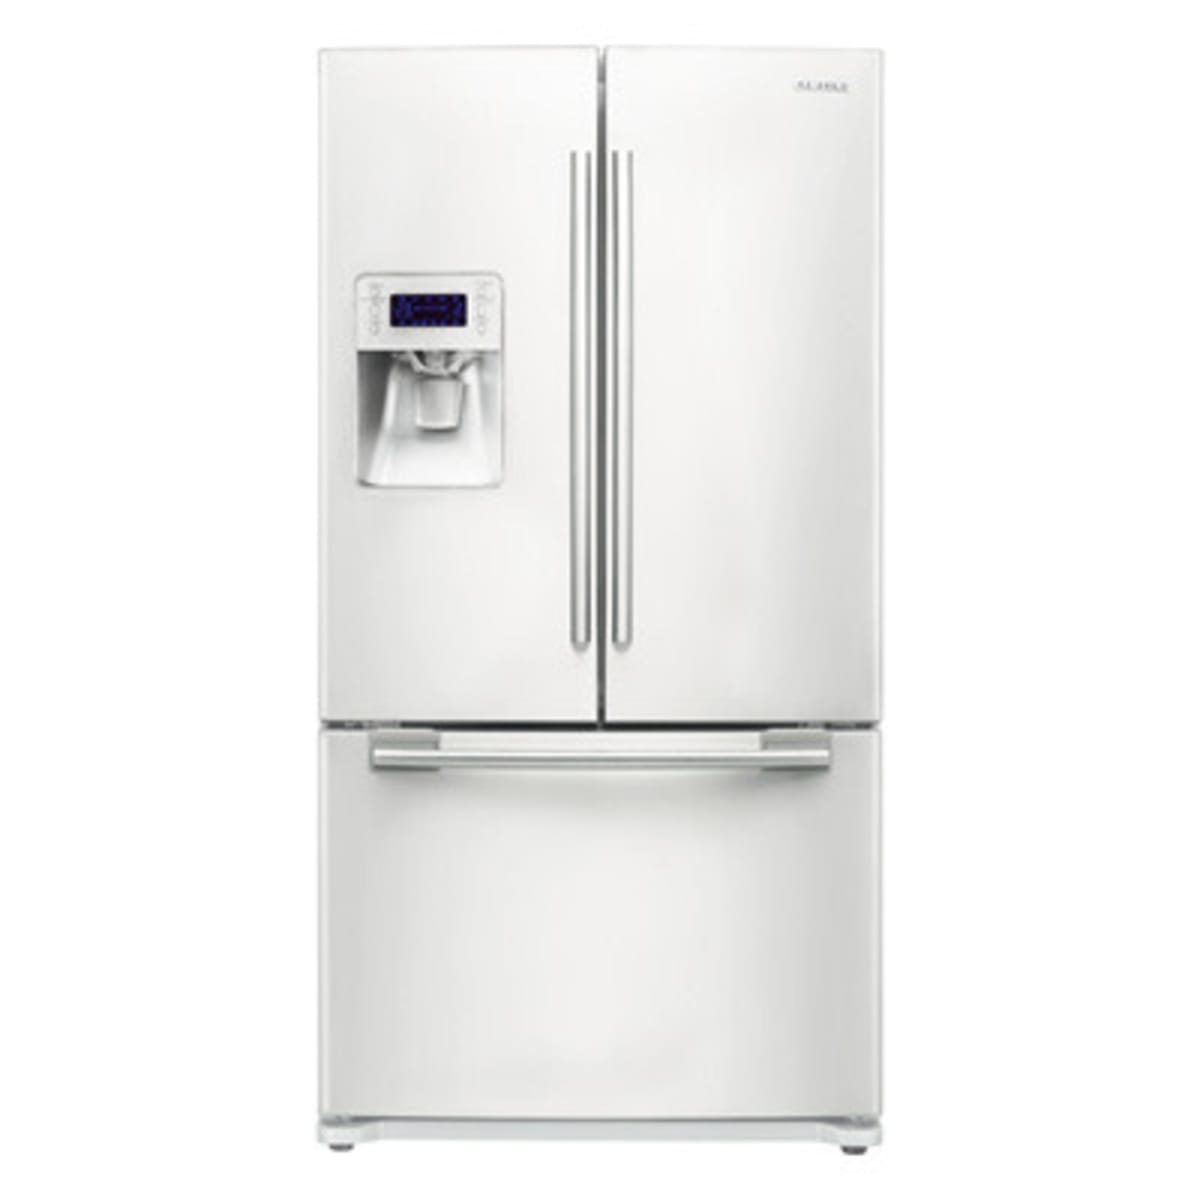 Refrigerators Reviews, Features, and Deals - Reviewed